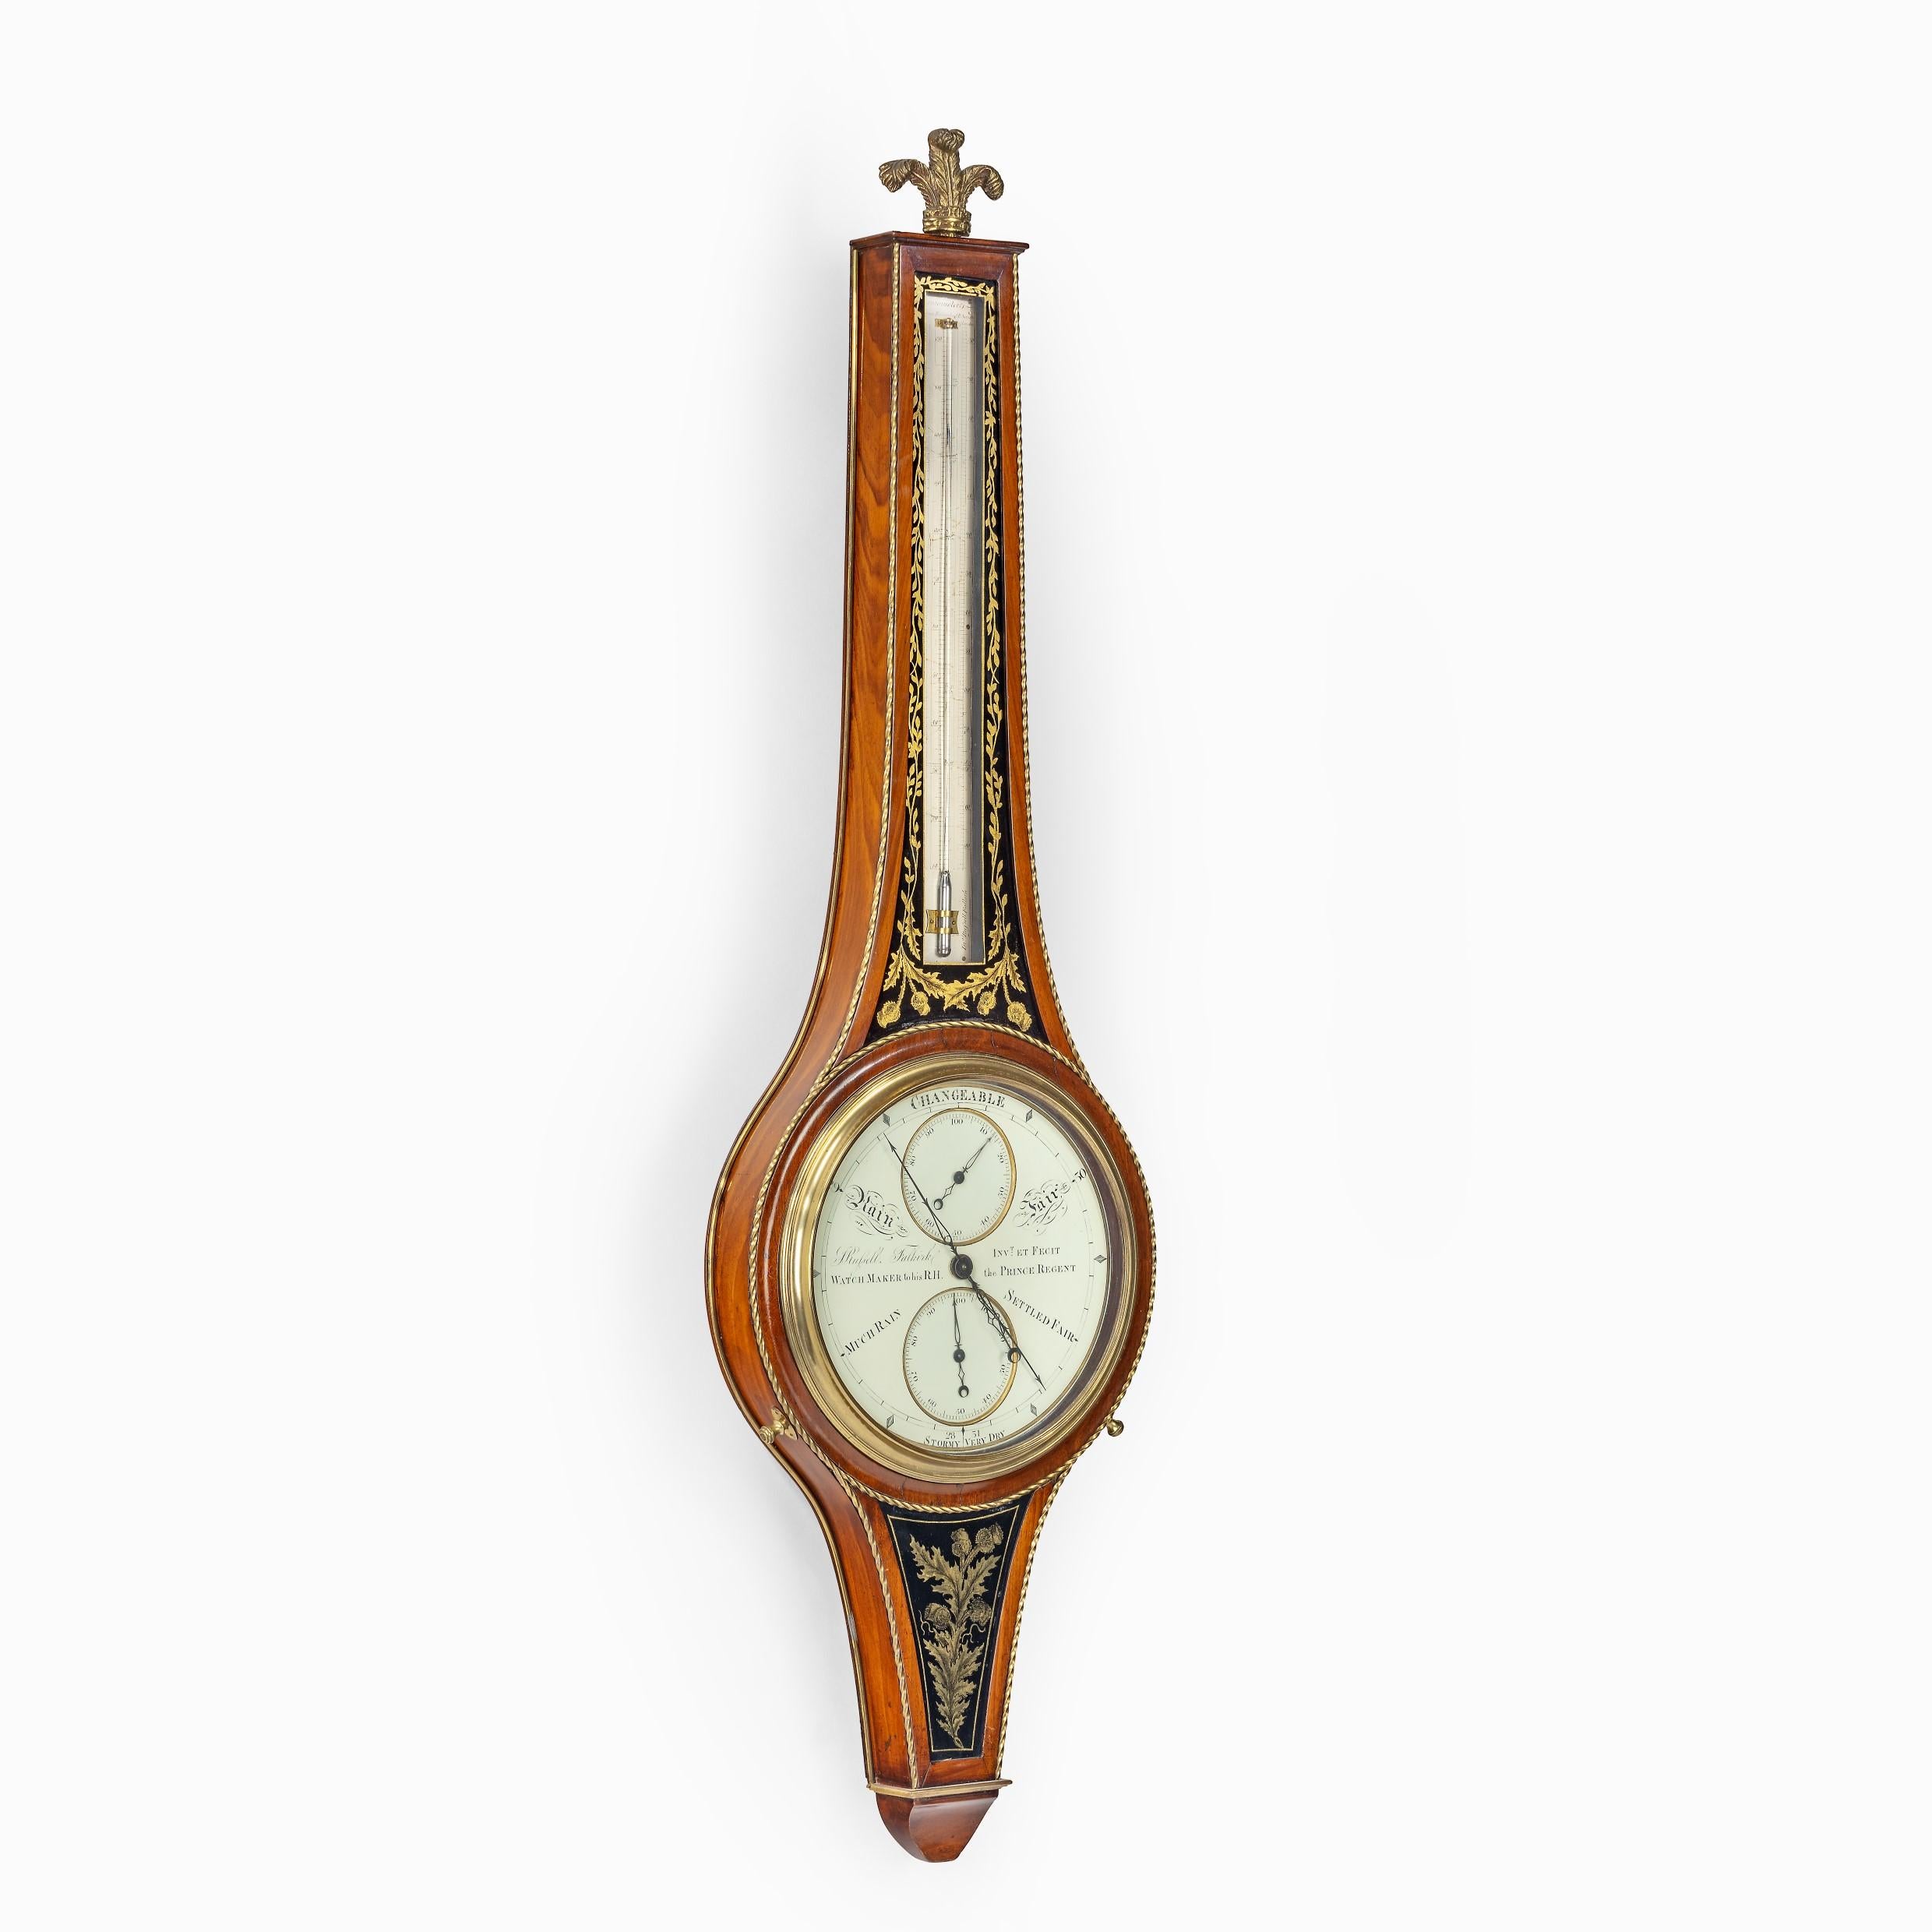 This superbly crafted wheel barometer and thermometer has a mahogany case surrounded by twisted brass stringing and central panels of foliate tendrils above Russell’s signature thistle motif in black and gilt verre églomisé. It is surmounted by a